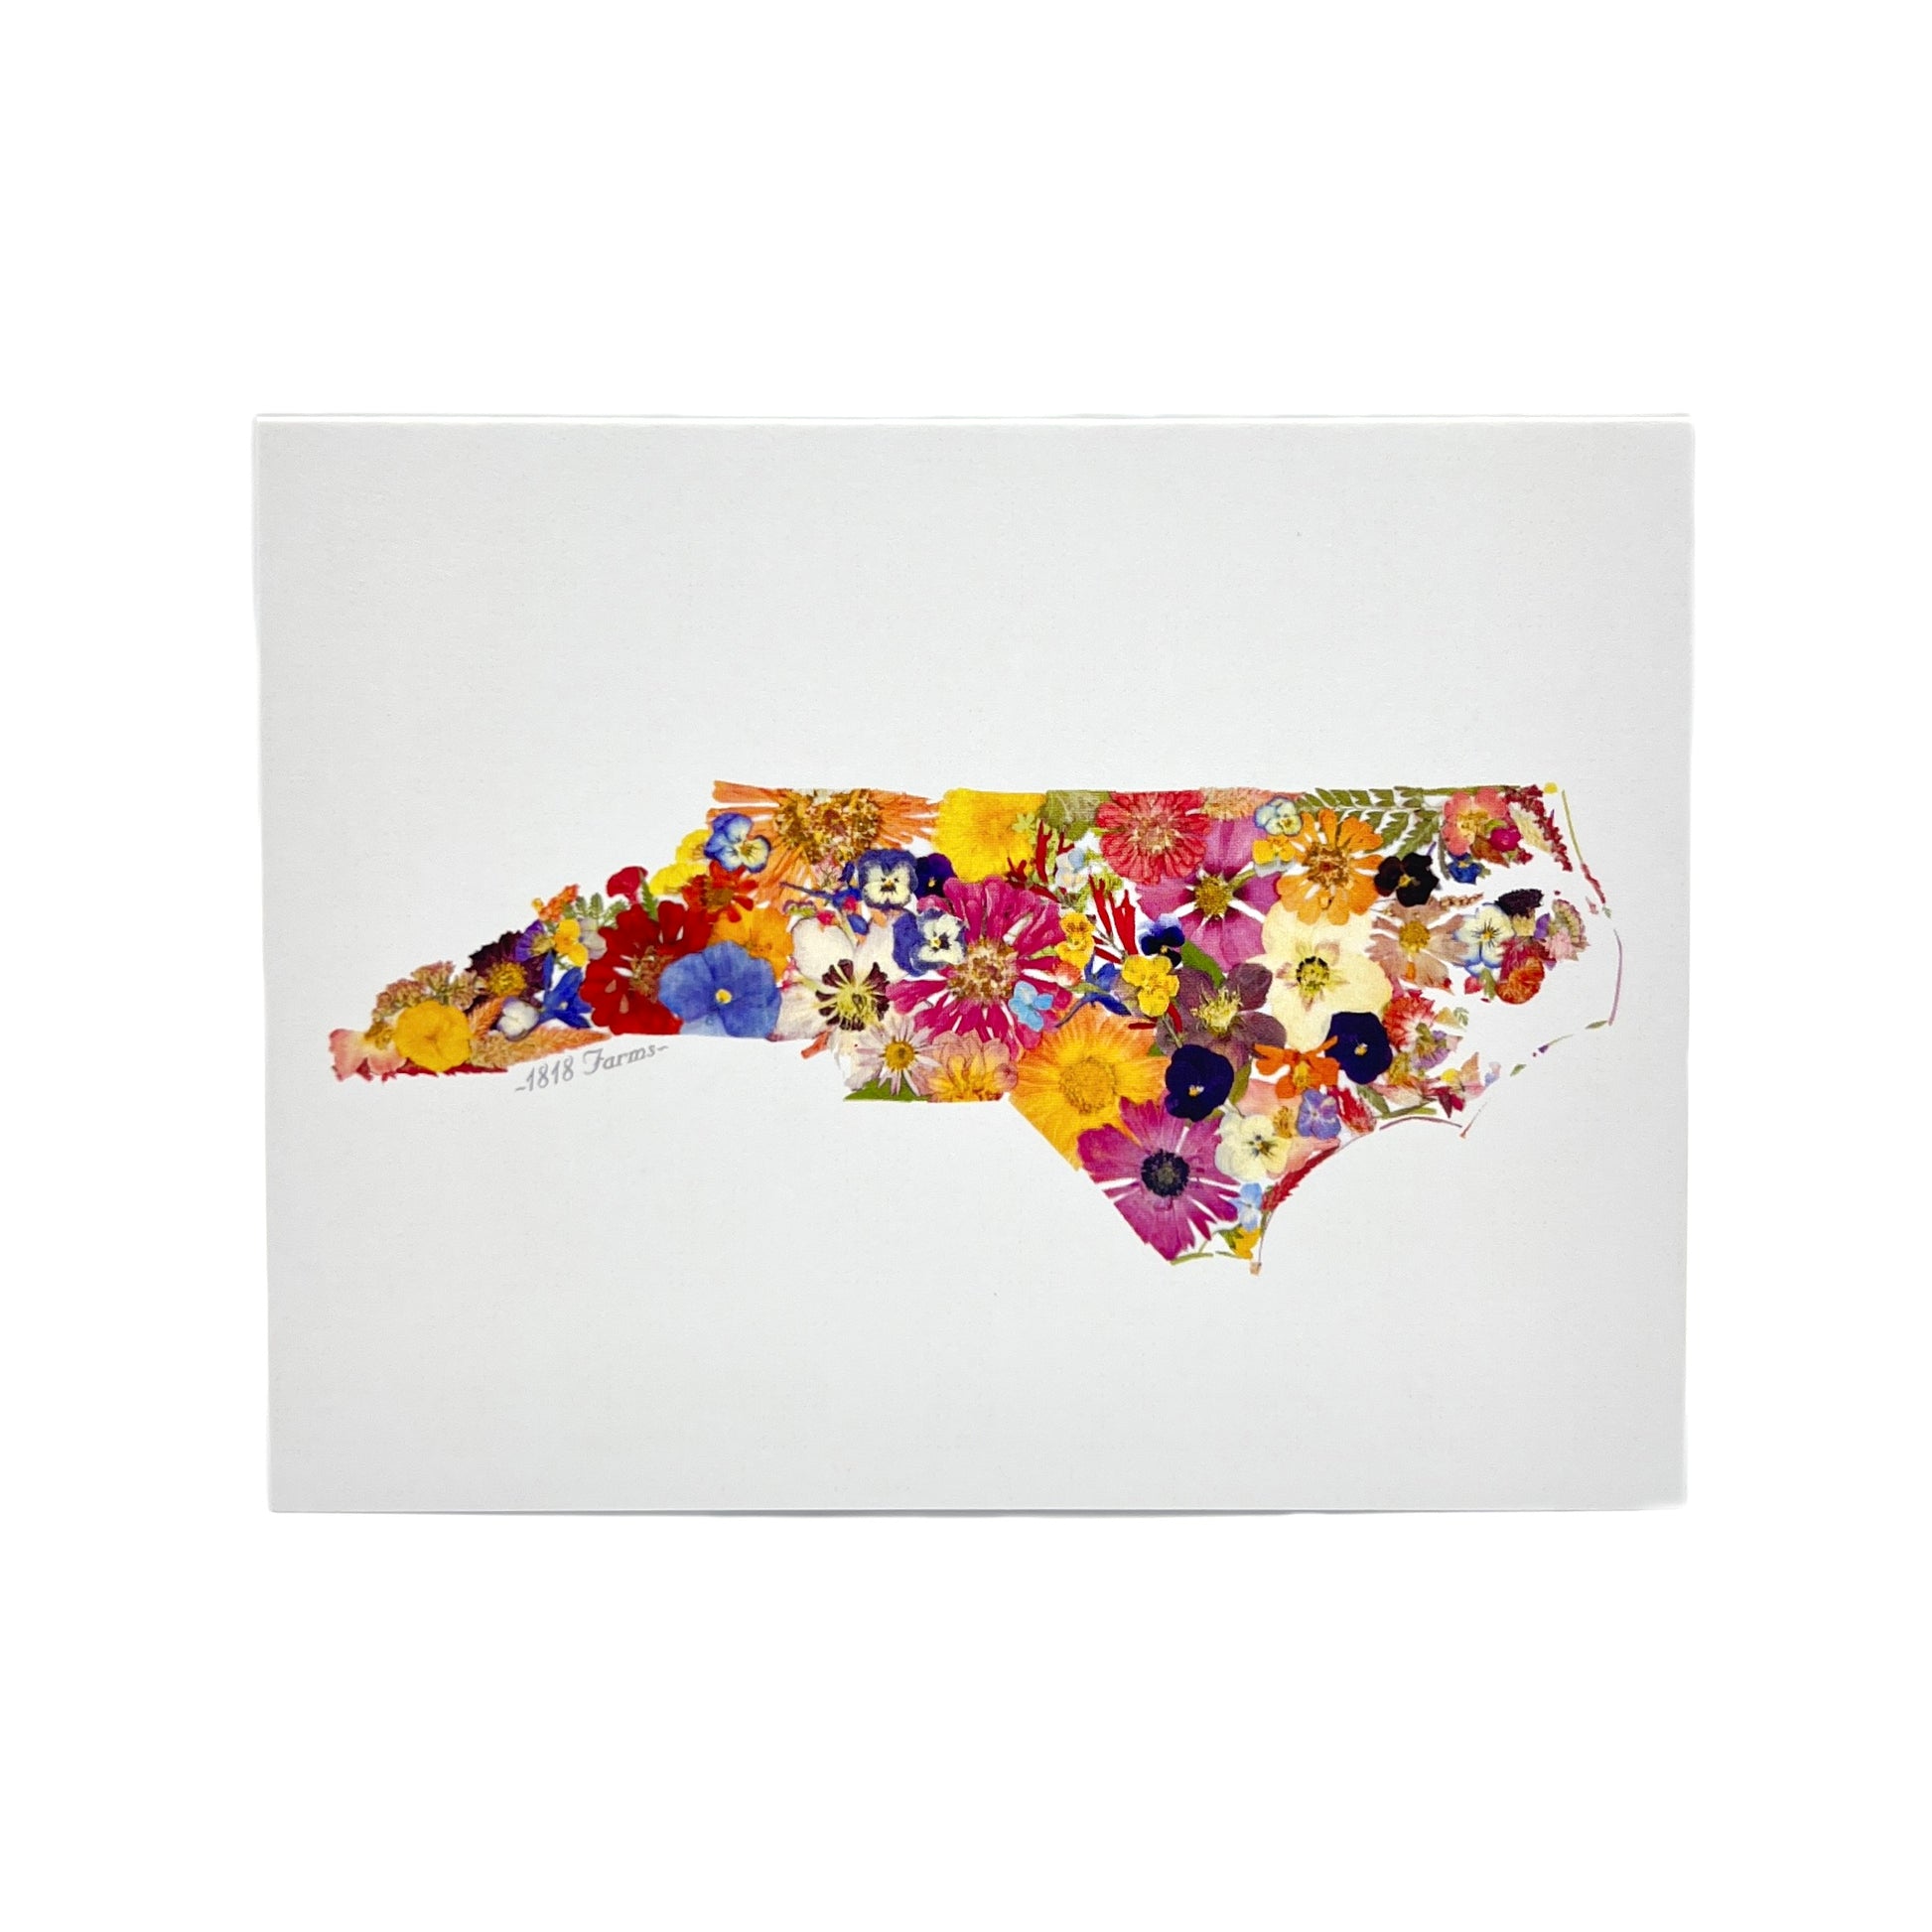 State Themed Notecards (Set of 6) Featuring Dried, Pressed Flowers - "Where I Bloom" Collection Notecard 1818 Farms North Carolina  